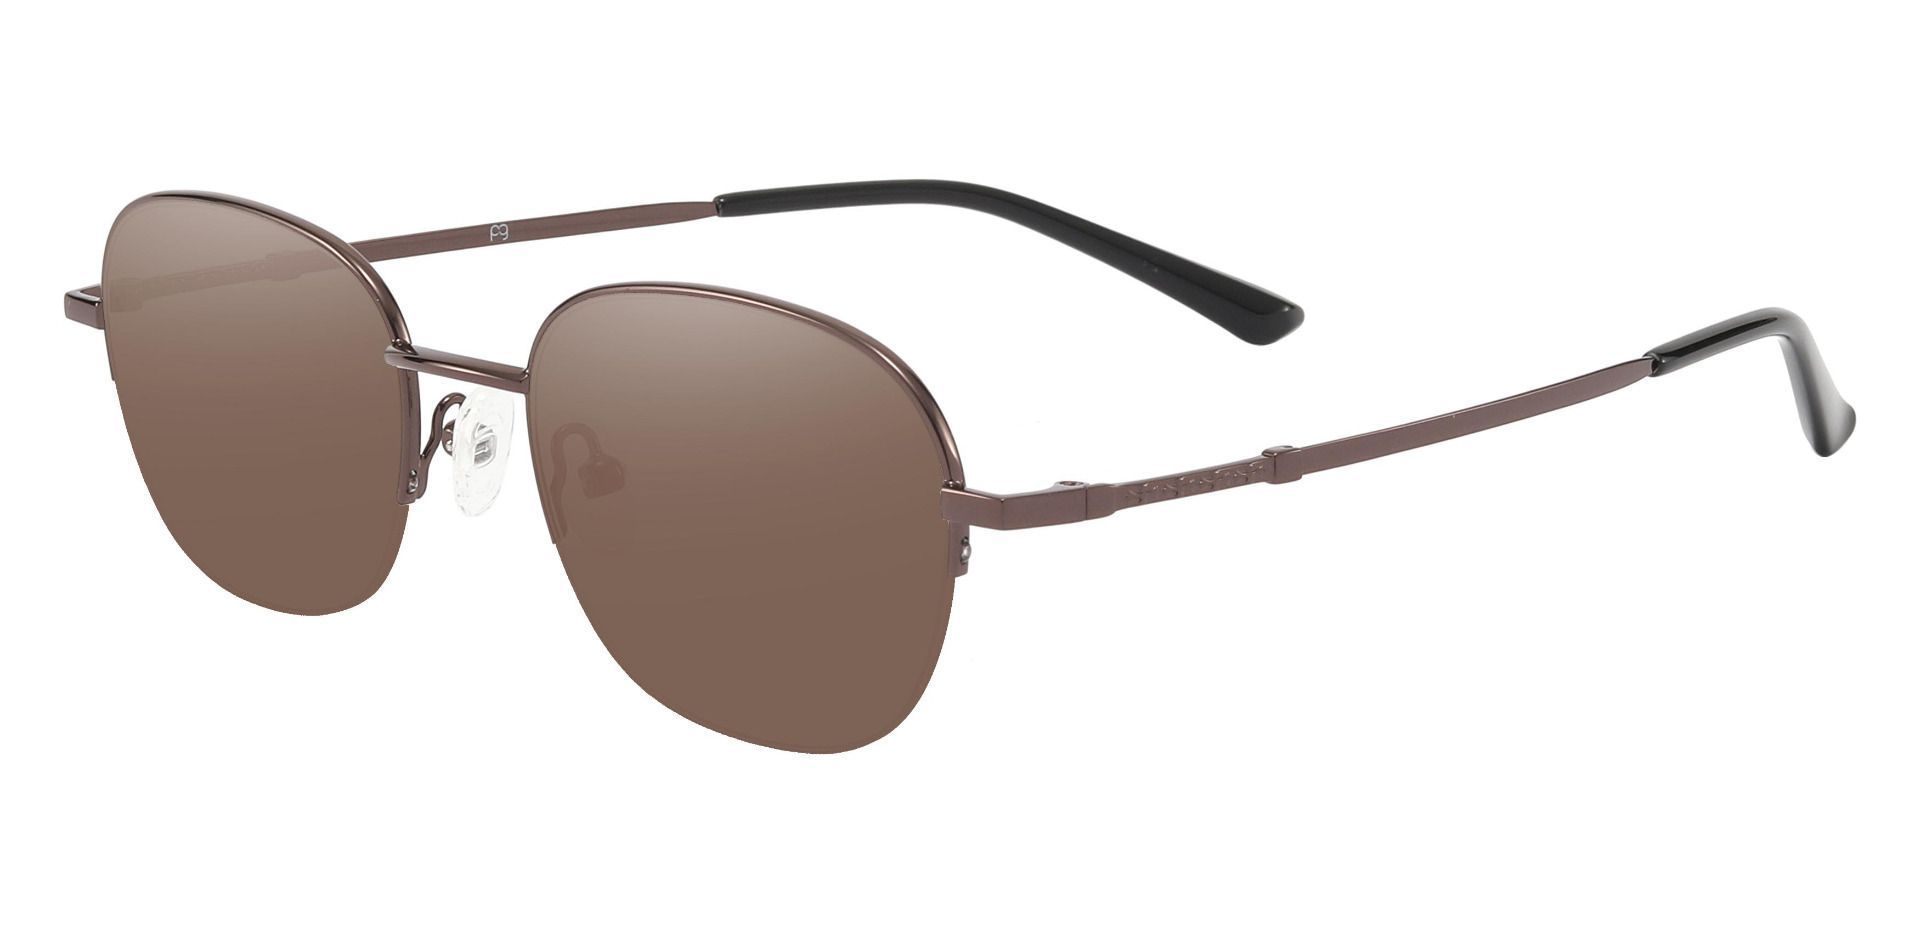 Rochester Oval Non-Rx Sunglasses - Brown Frame With Brown Lenses